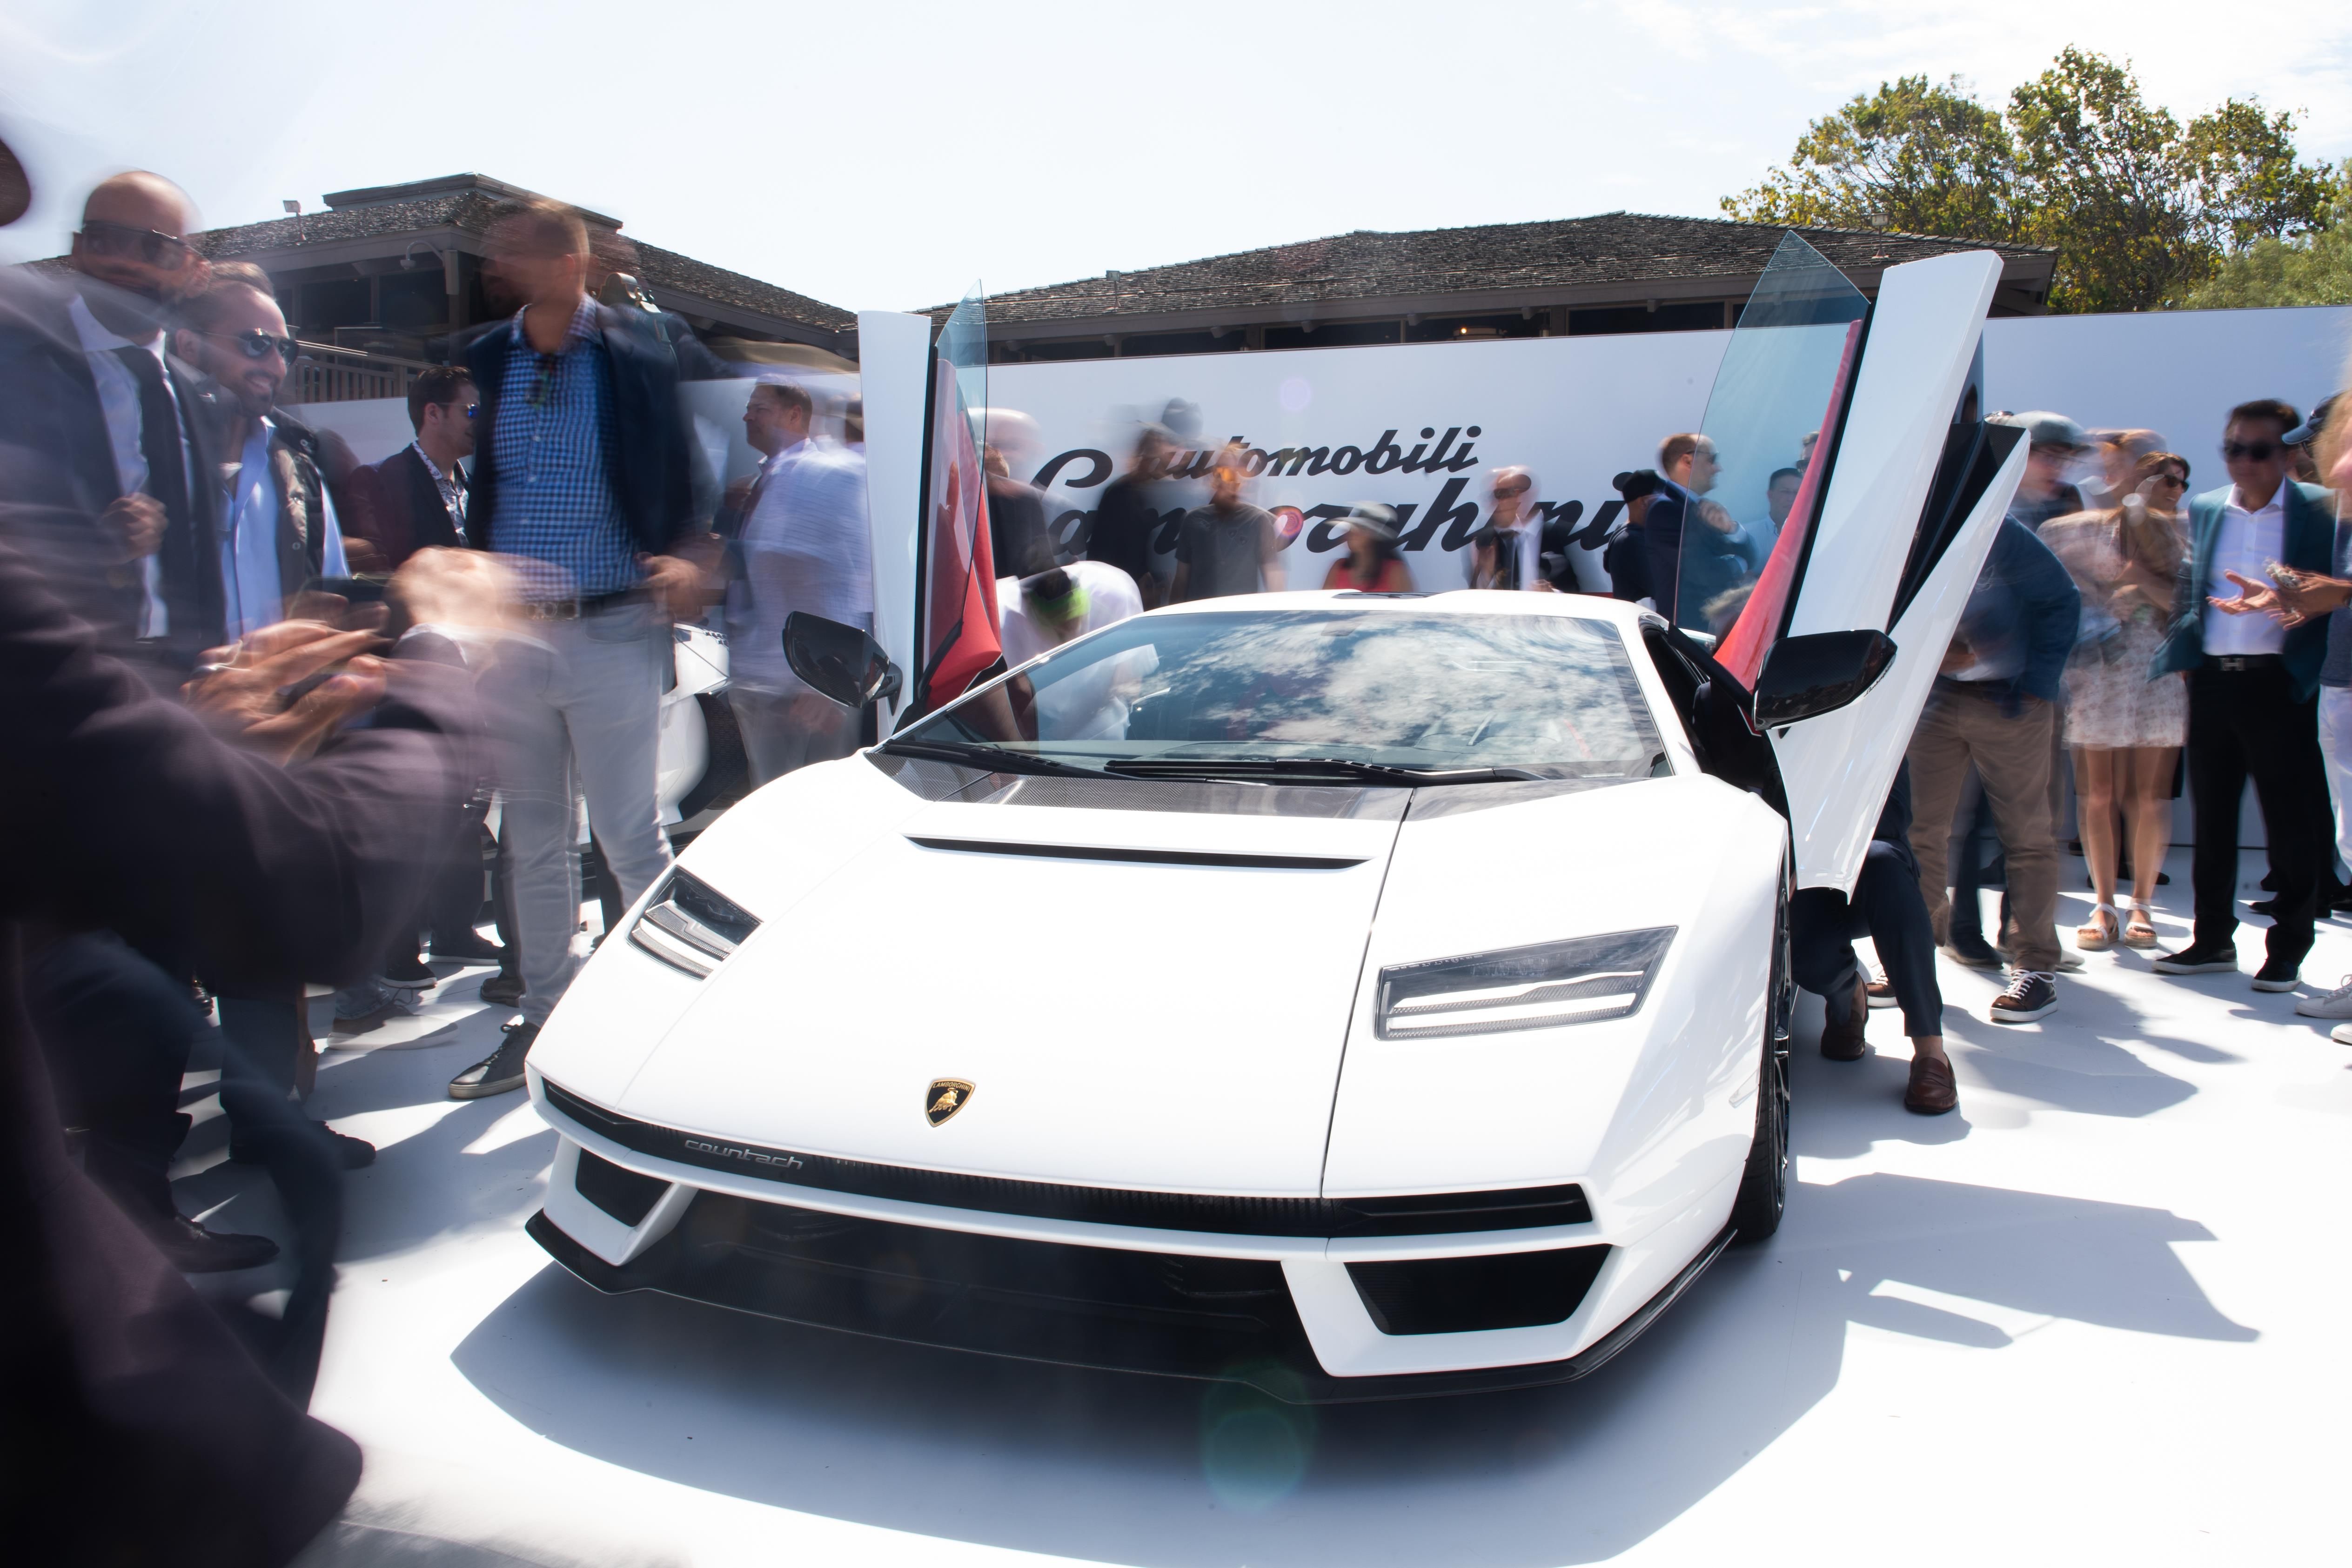 A New Lamborghini Countach Was Always Going to Happen